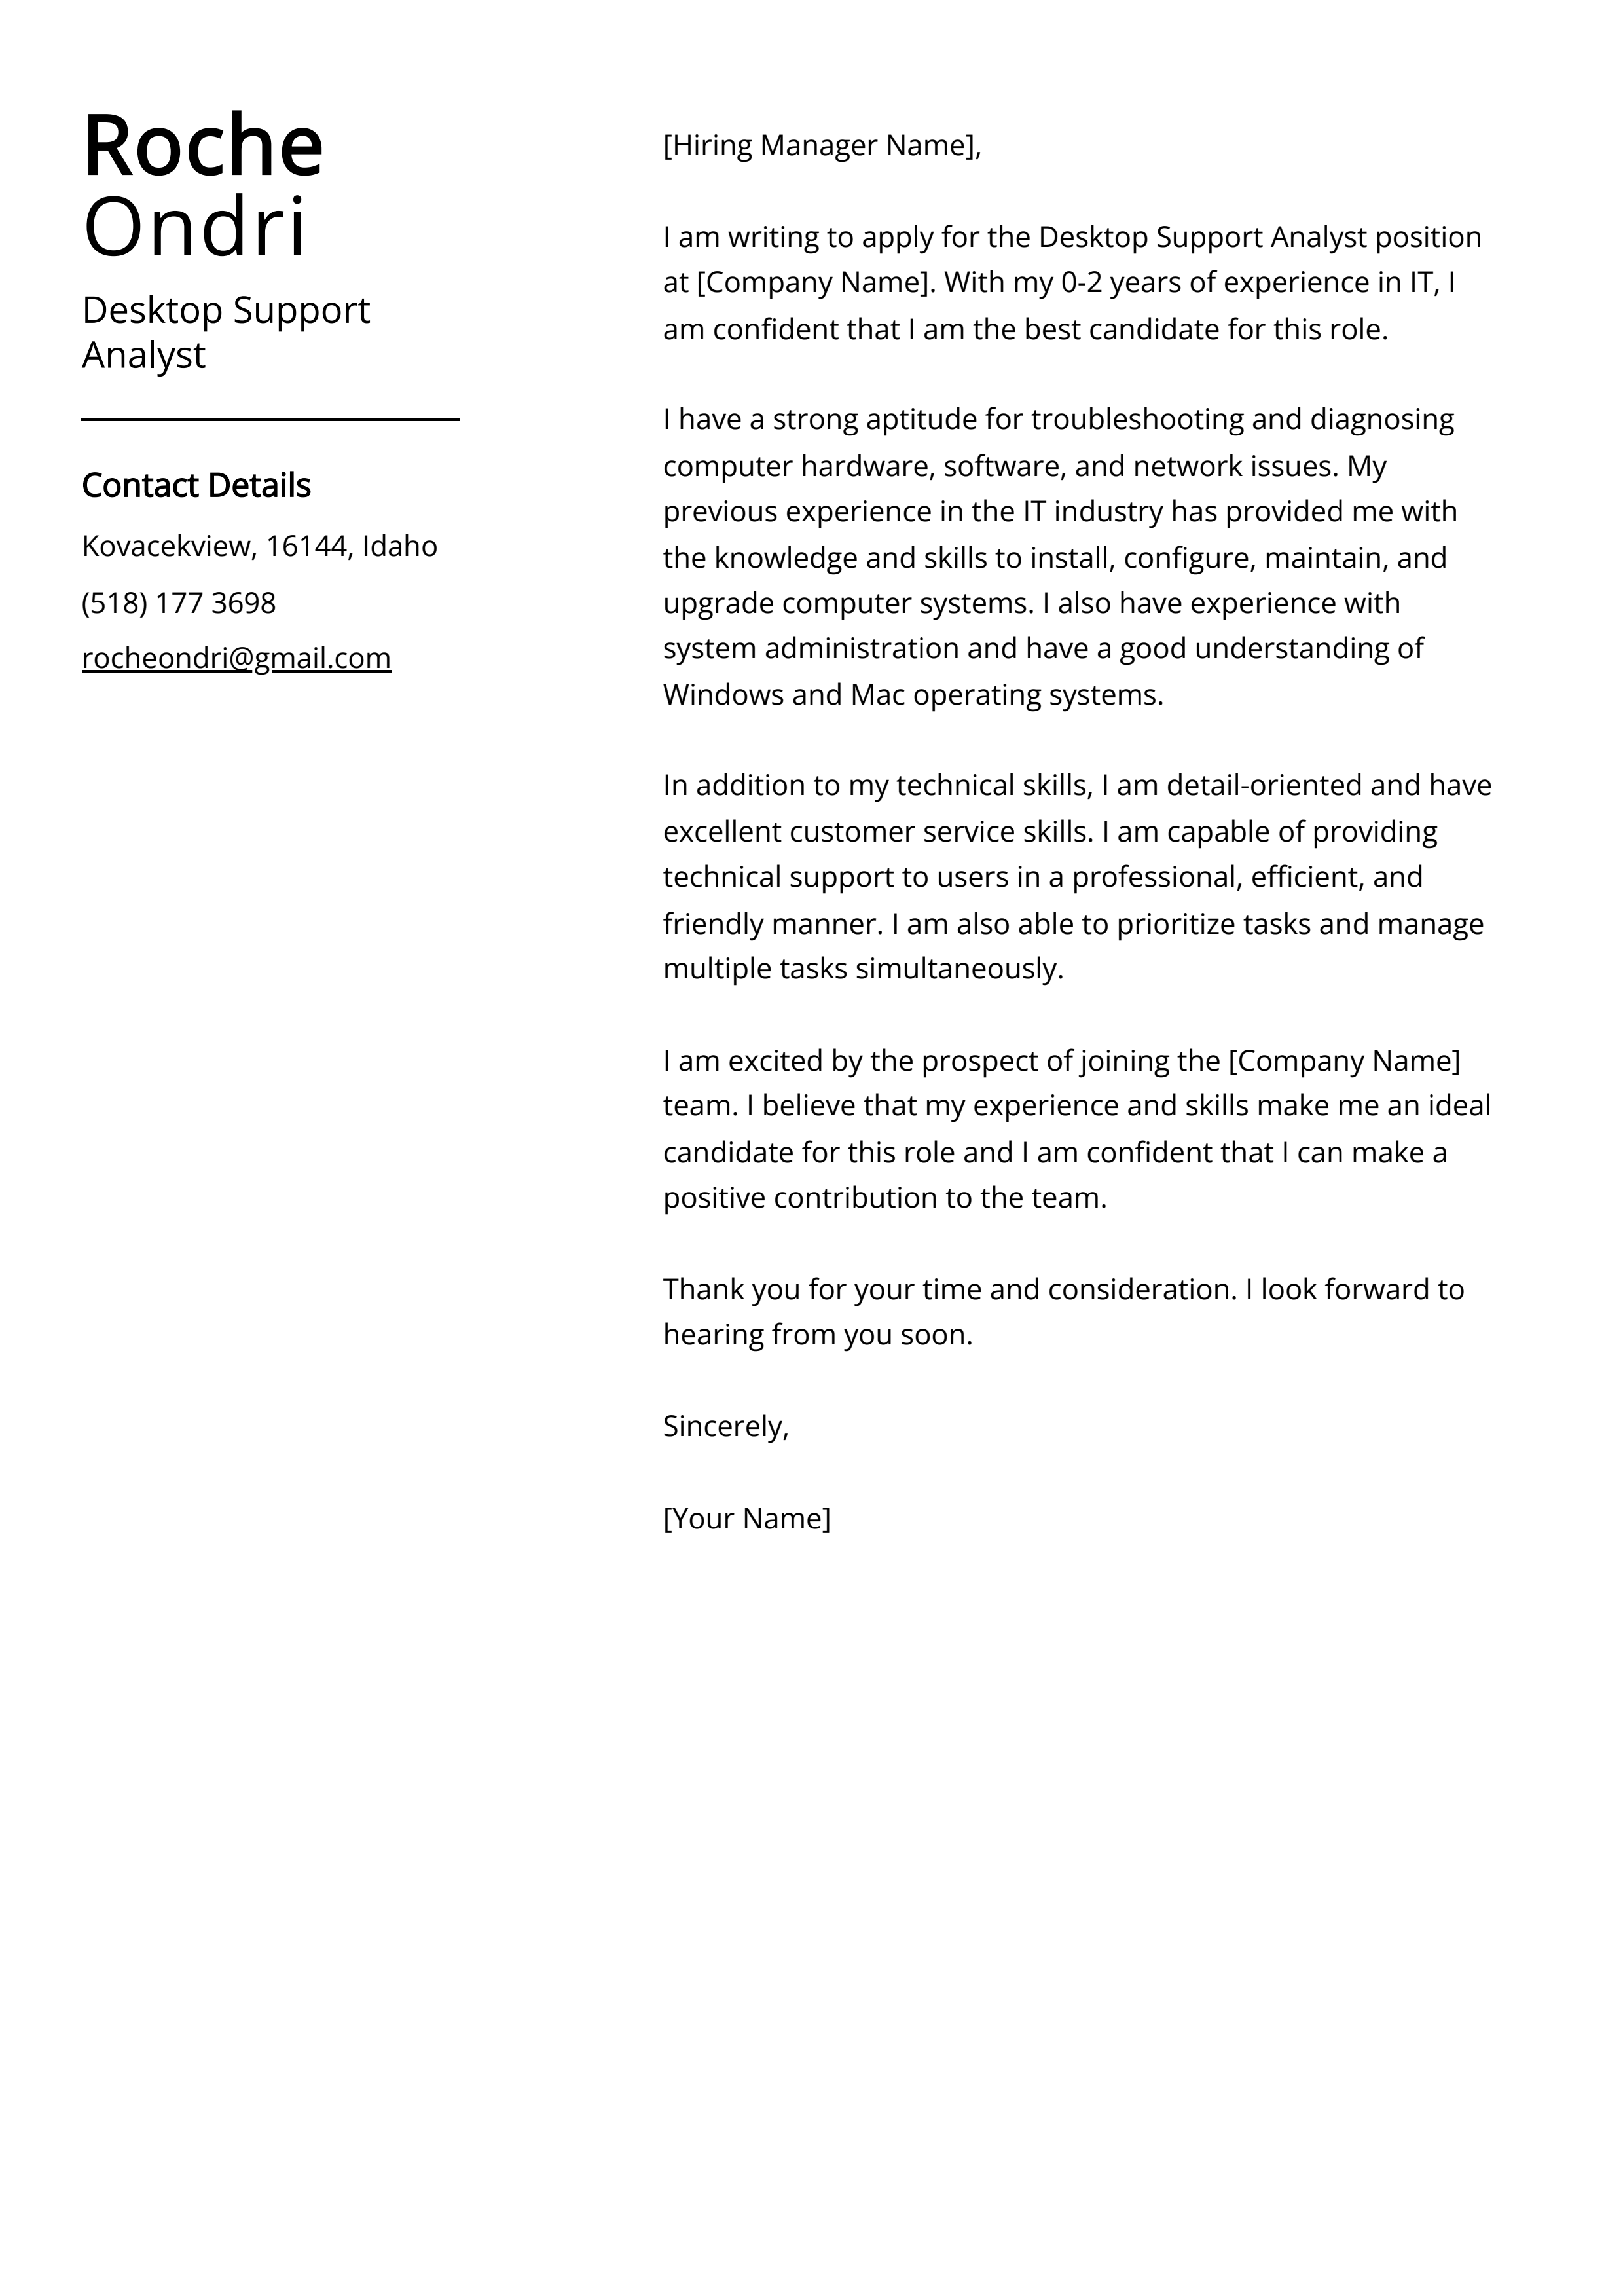 Desktop Support Analyst Cover Letter Example